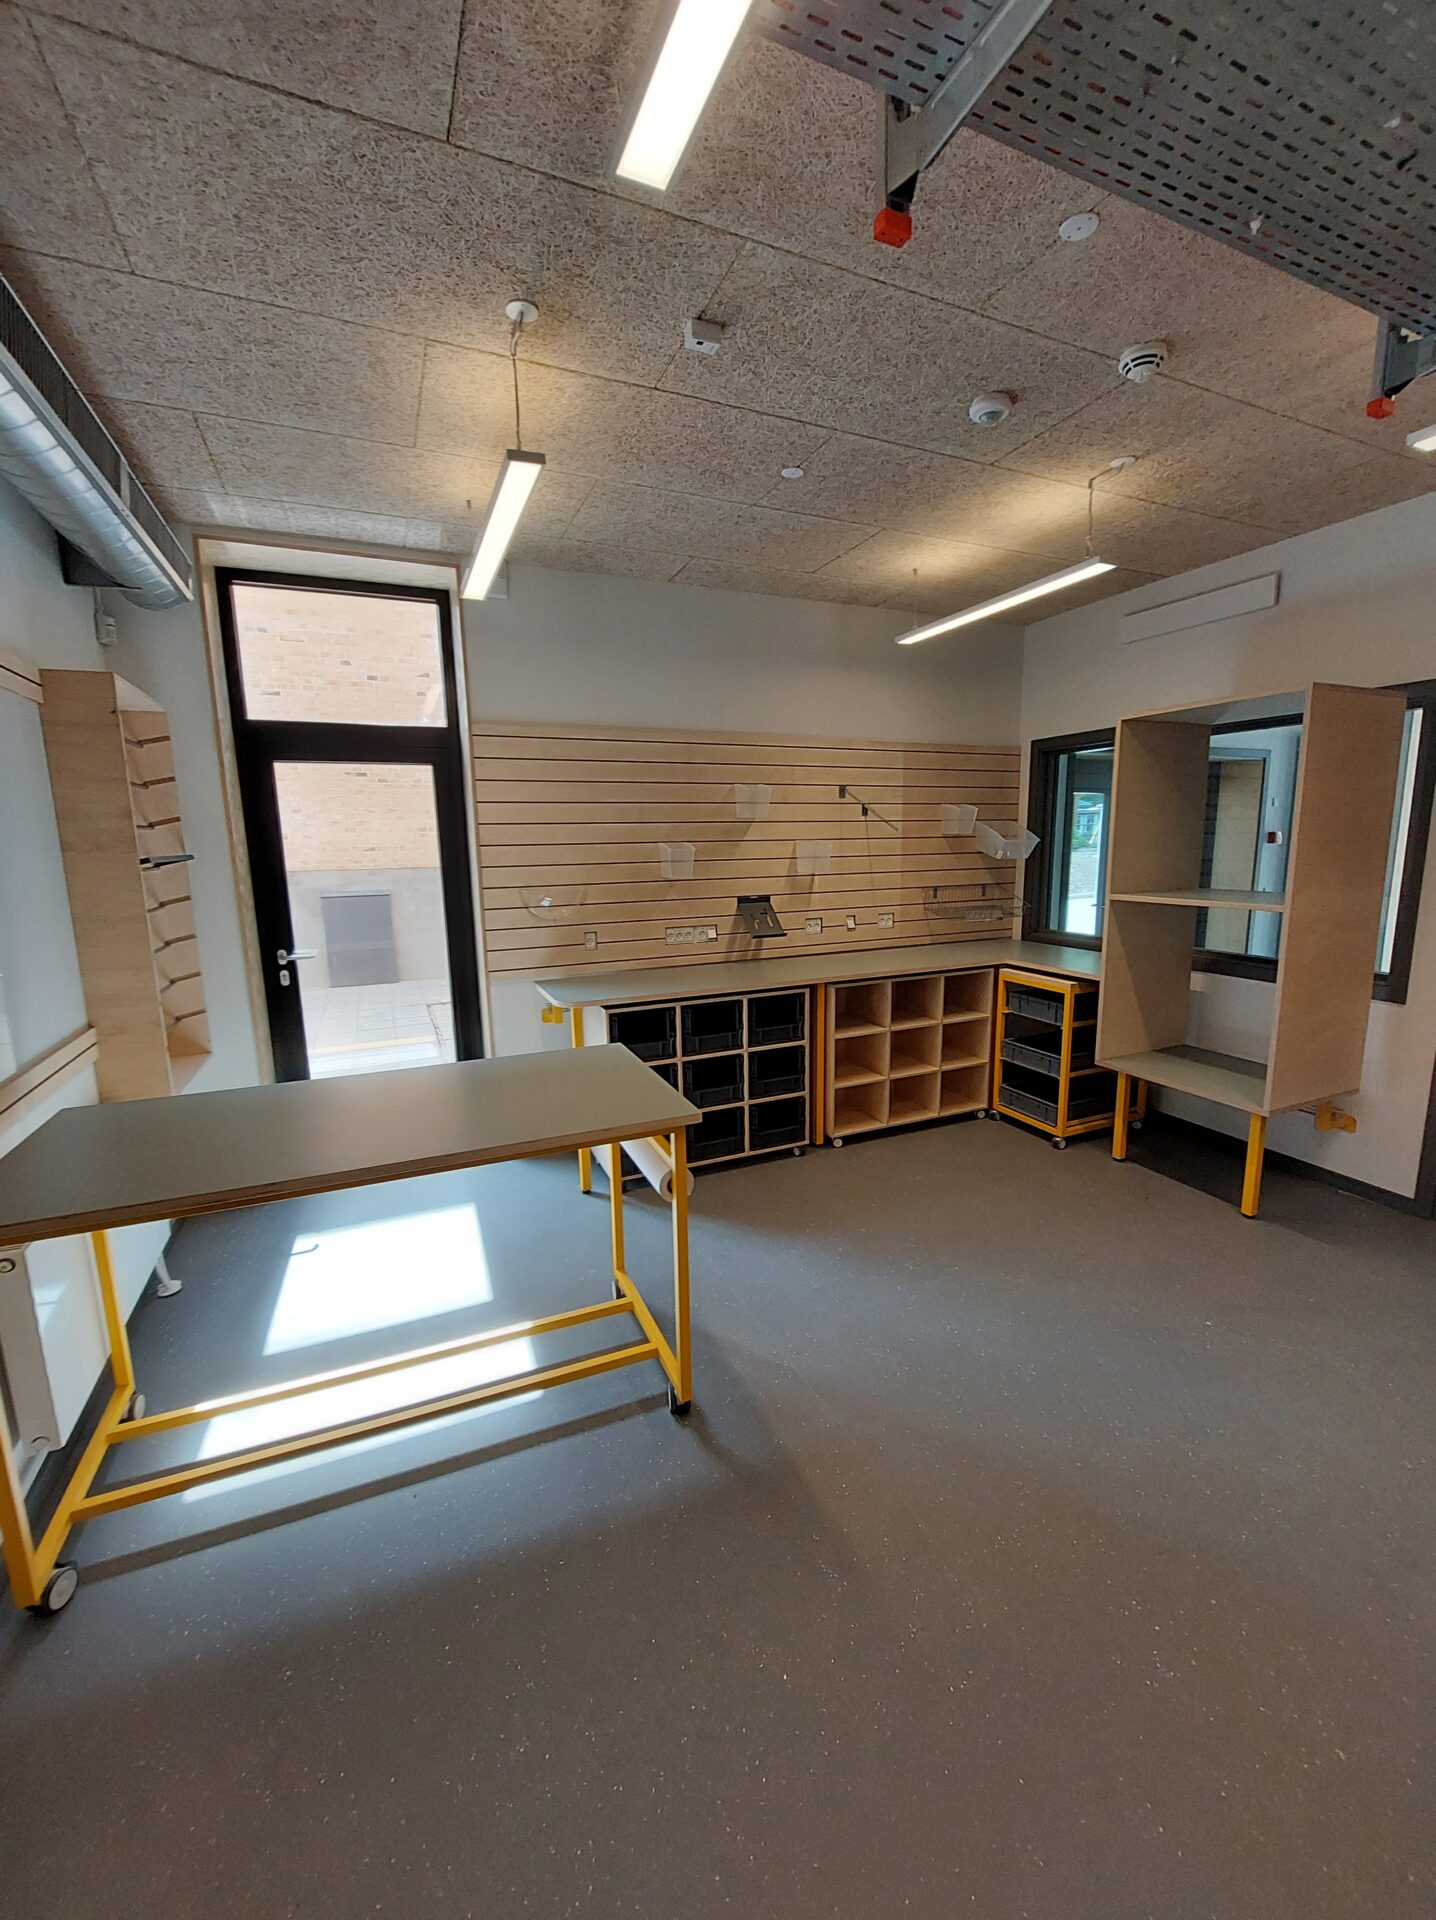 Makerspace - Osted Skole 1